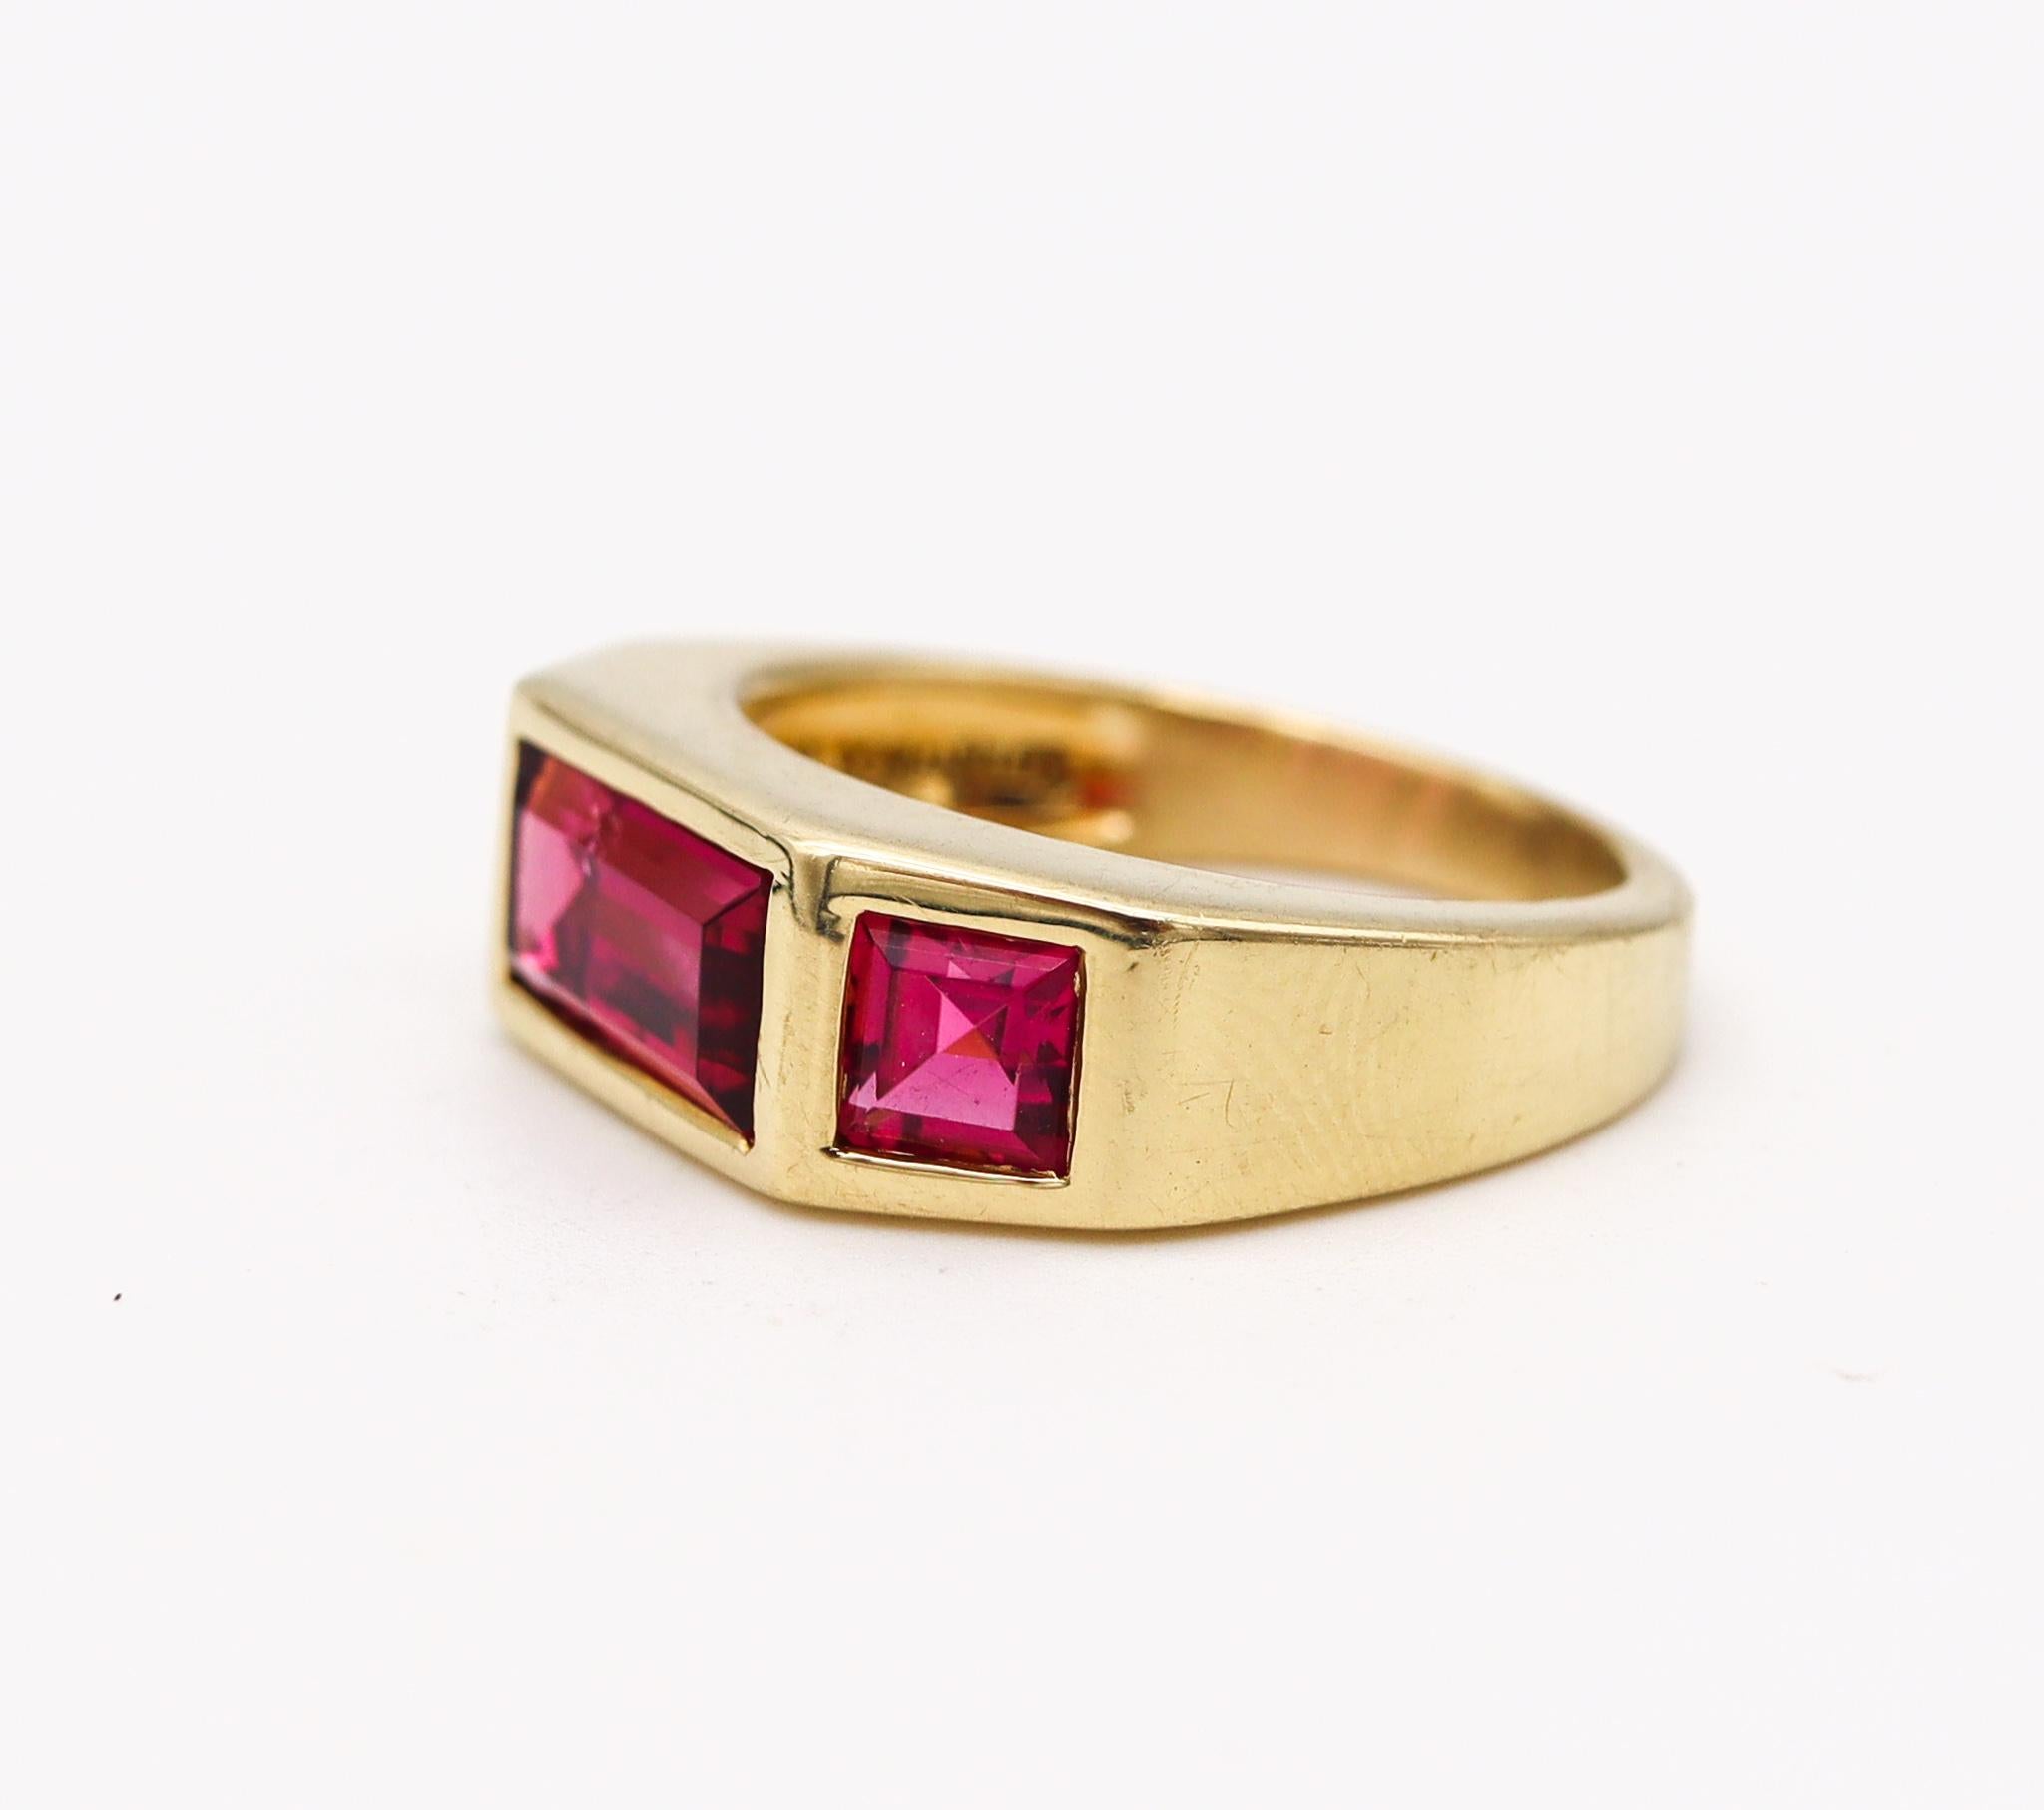 Women's or Men's Tiffany & Co Paloma Picasso Studio Geometric Ring 18Kt Gold 4.34 Cts Tourmalines